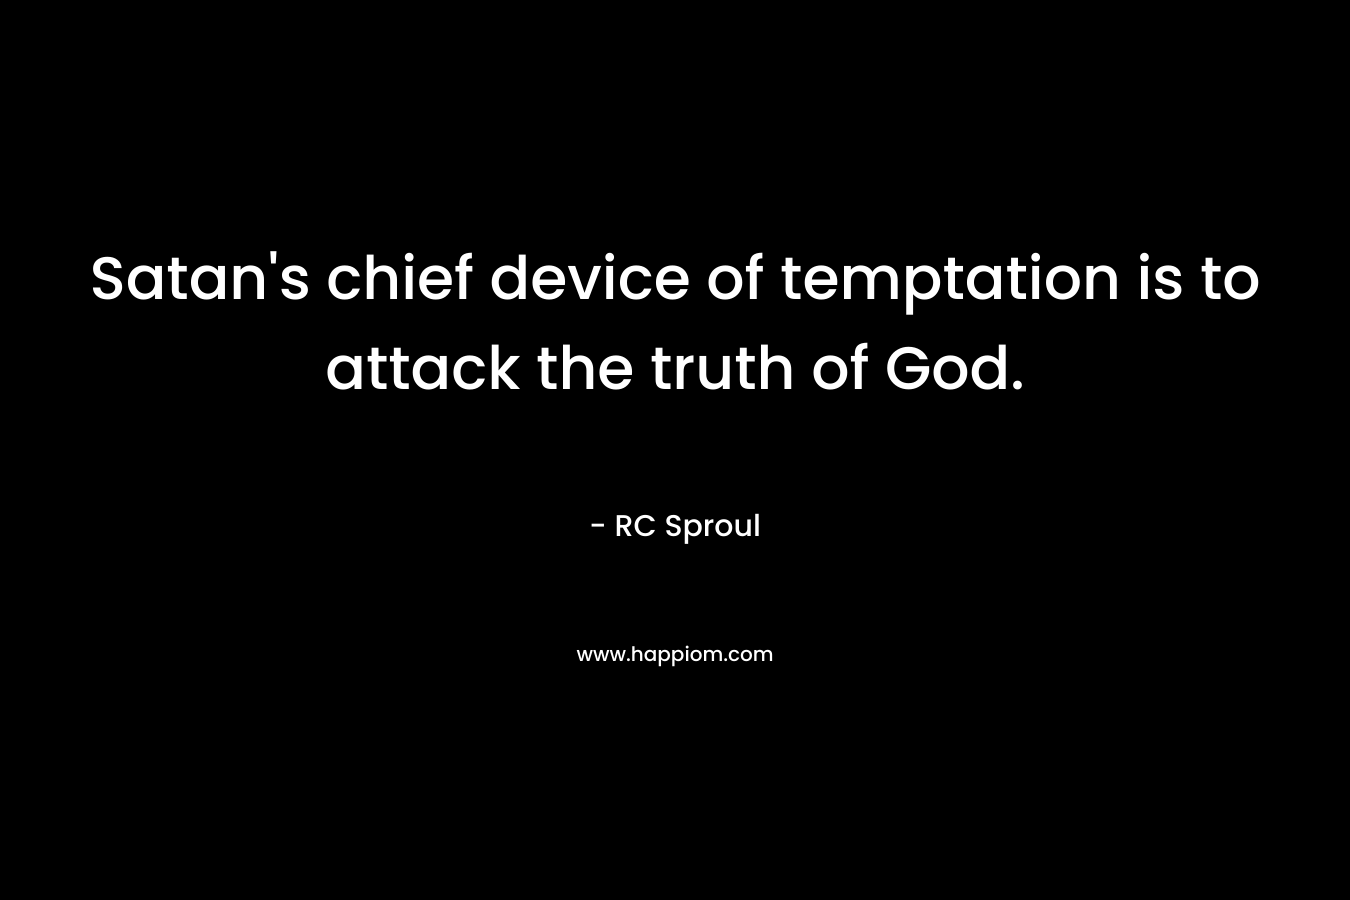 Satan's chief device of temptation is to attack the truth of God.